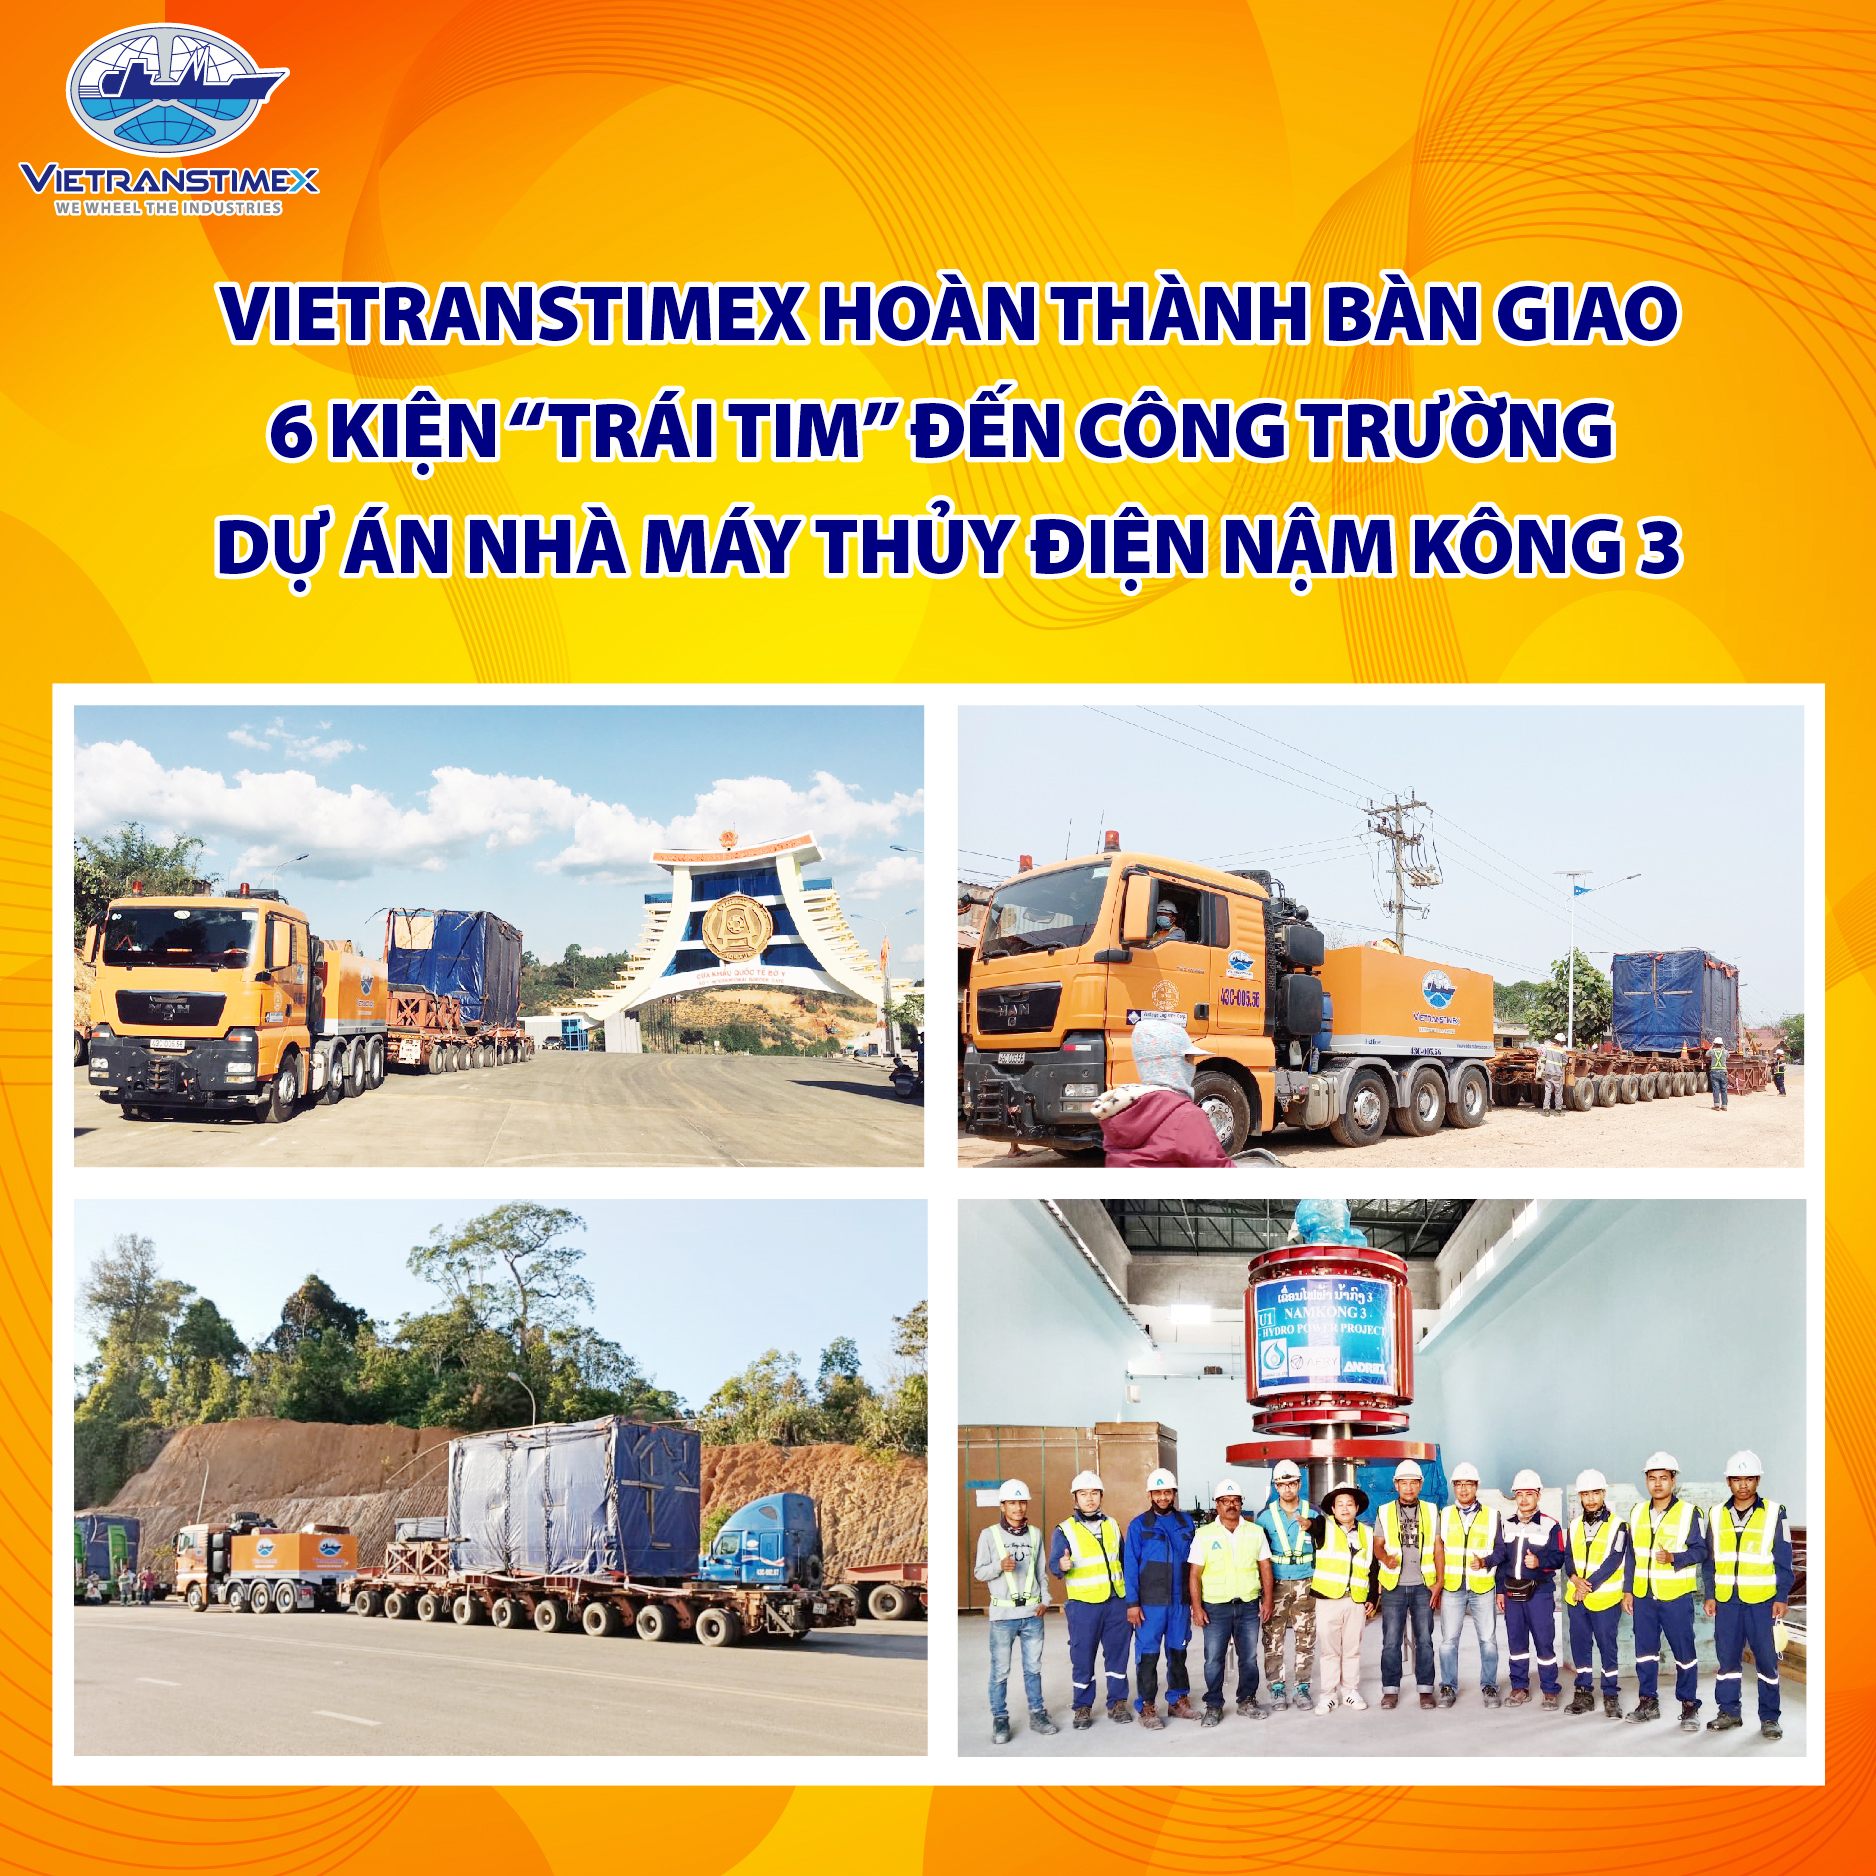 VIETRANSTIMEX COMPLETED HAND-OVER OF 6 “HEART” PACKAGES TO NAM KONG 3 HYDROPOWER PROJECT SITE